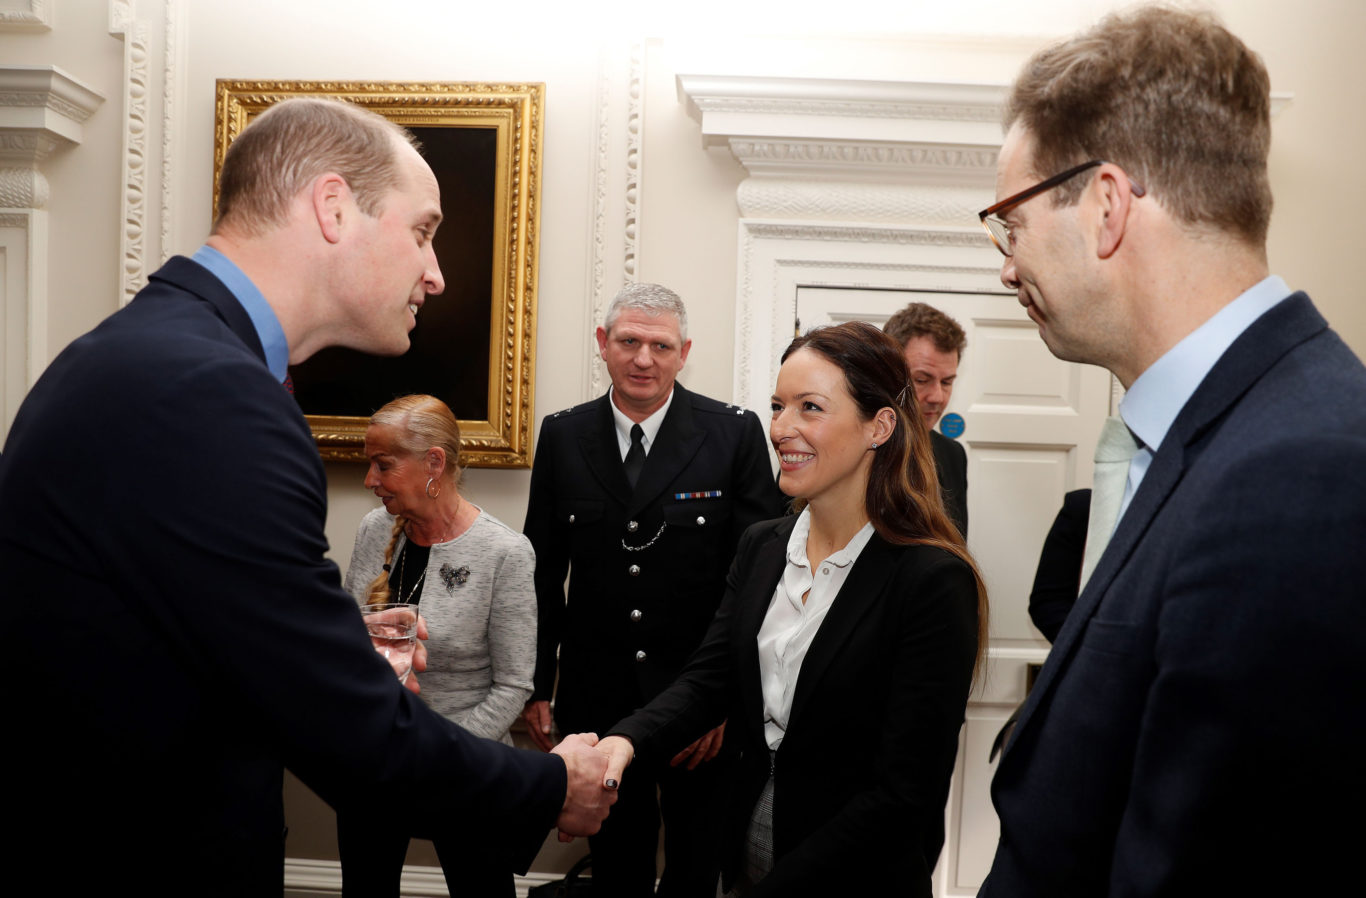 The Duke of Cambridge greets guests at the event (Adrian Dennis/PA)